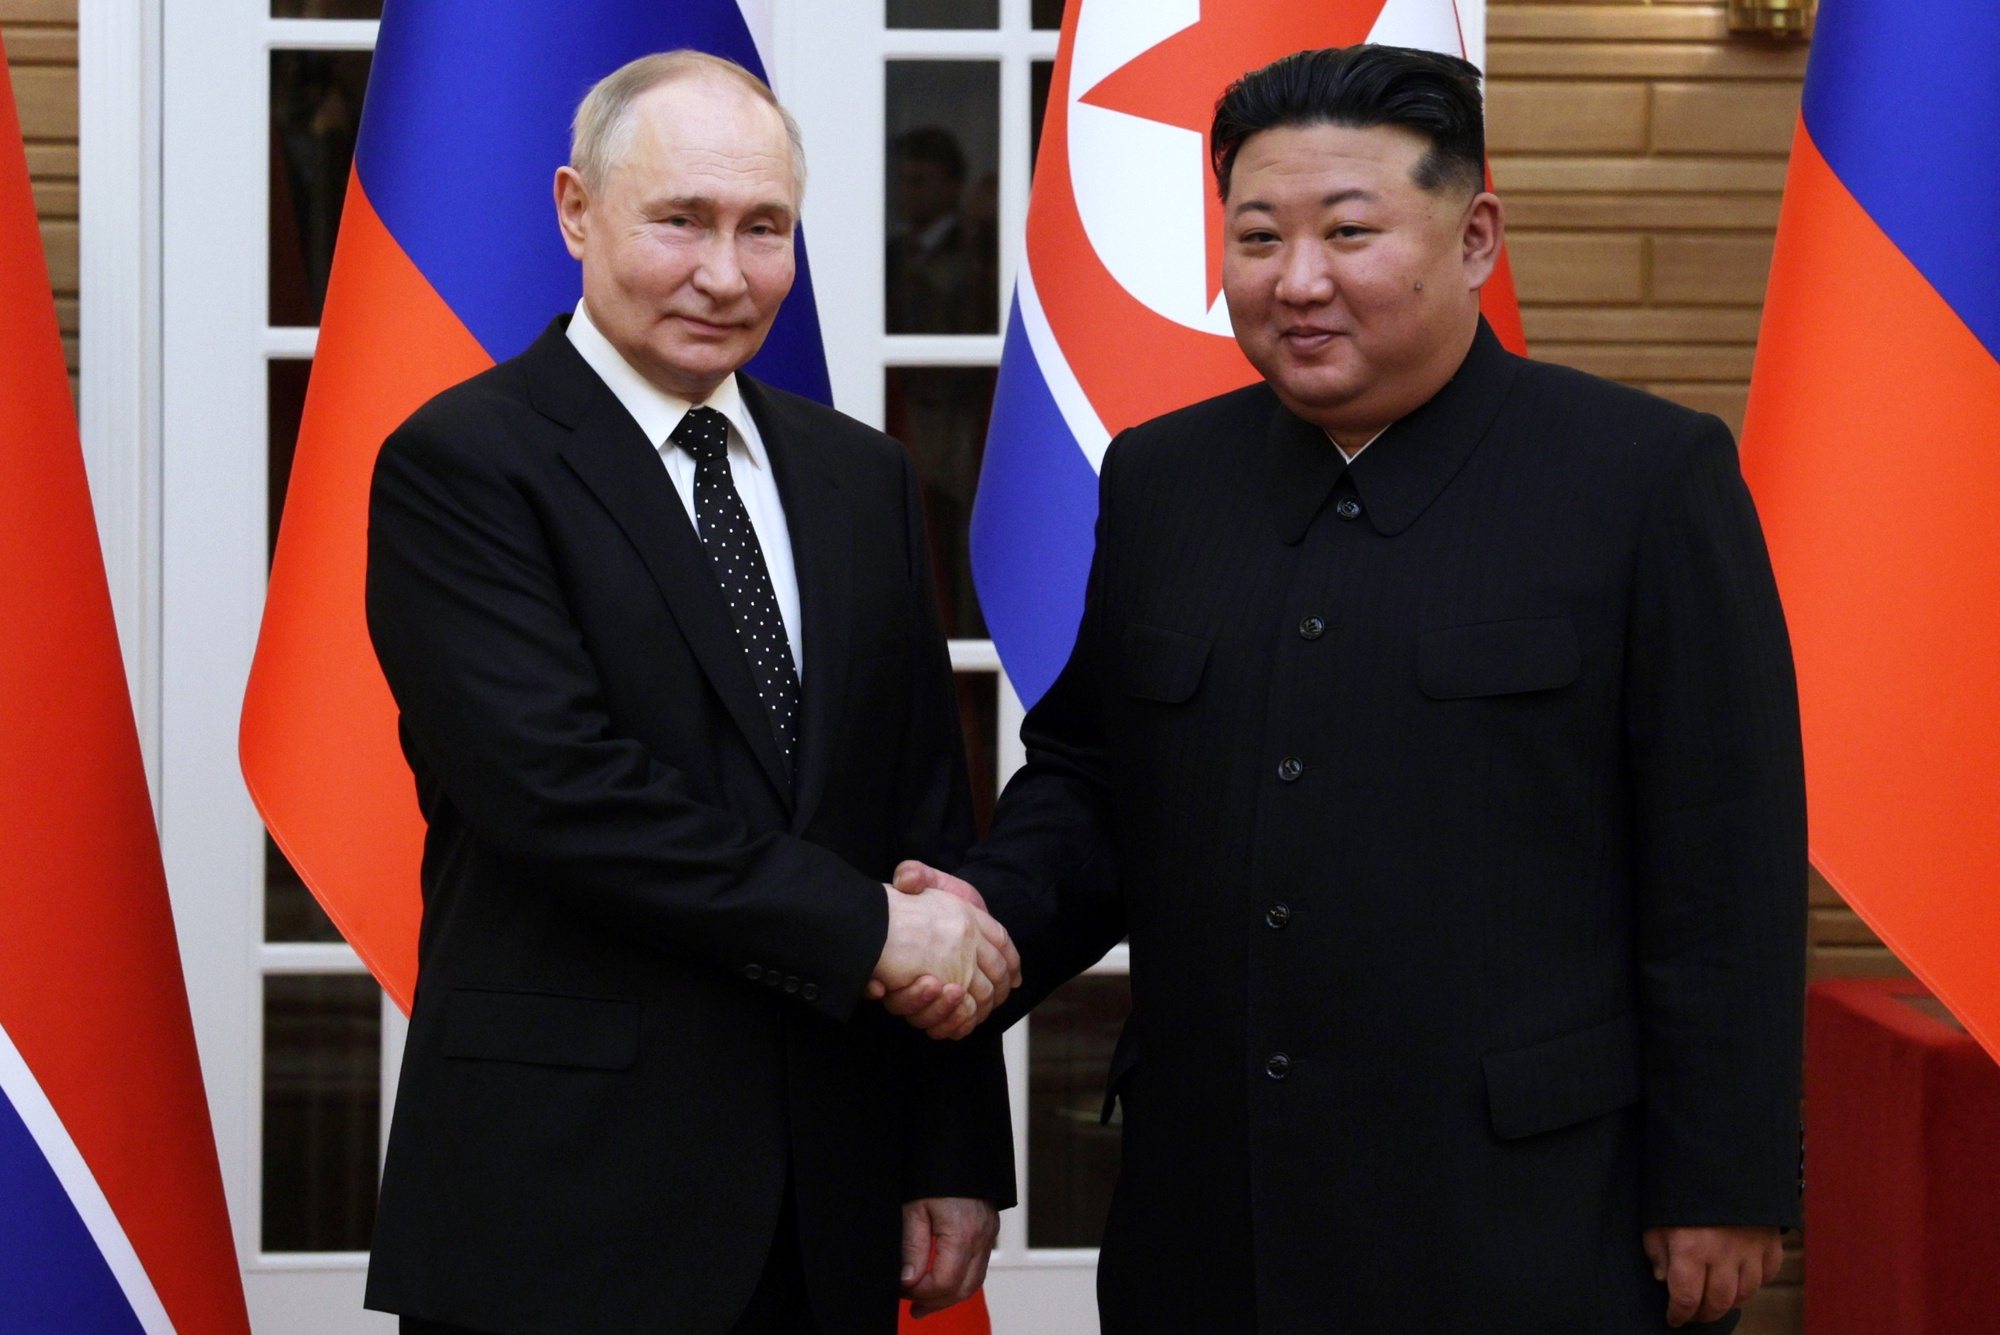 epaselect epa11421552 Russian President Vladimir Putin (L) shakes hands with North Korean leader Kim Jong Un (R) during their meeting in Pyongyang, North Korea, 19 June 2024. The Russian president is on a state visit to North Korea from 18-19 June at the invitation of the North Korean leader. He last visited North Korea in 2000, shortly after his first inauguration as president.  EPA/GAVRIIL GRIGOROV / SPUTNIK / KREMLIN POOL MANDATORY CREDIT